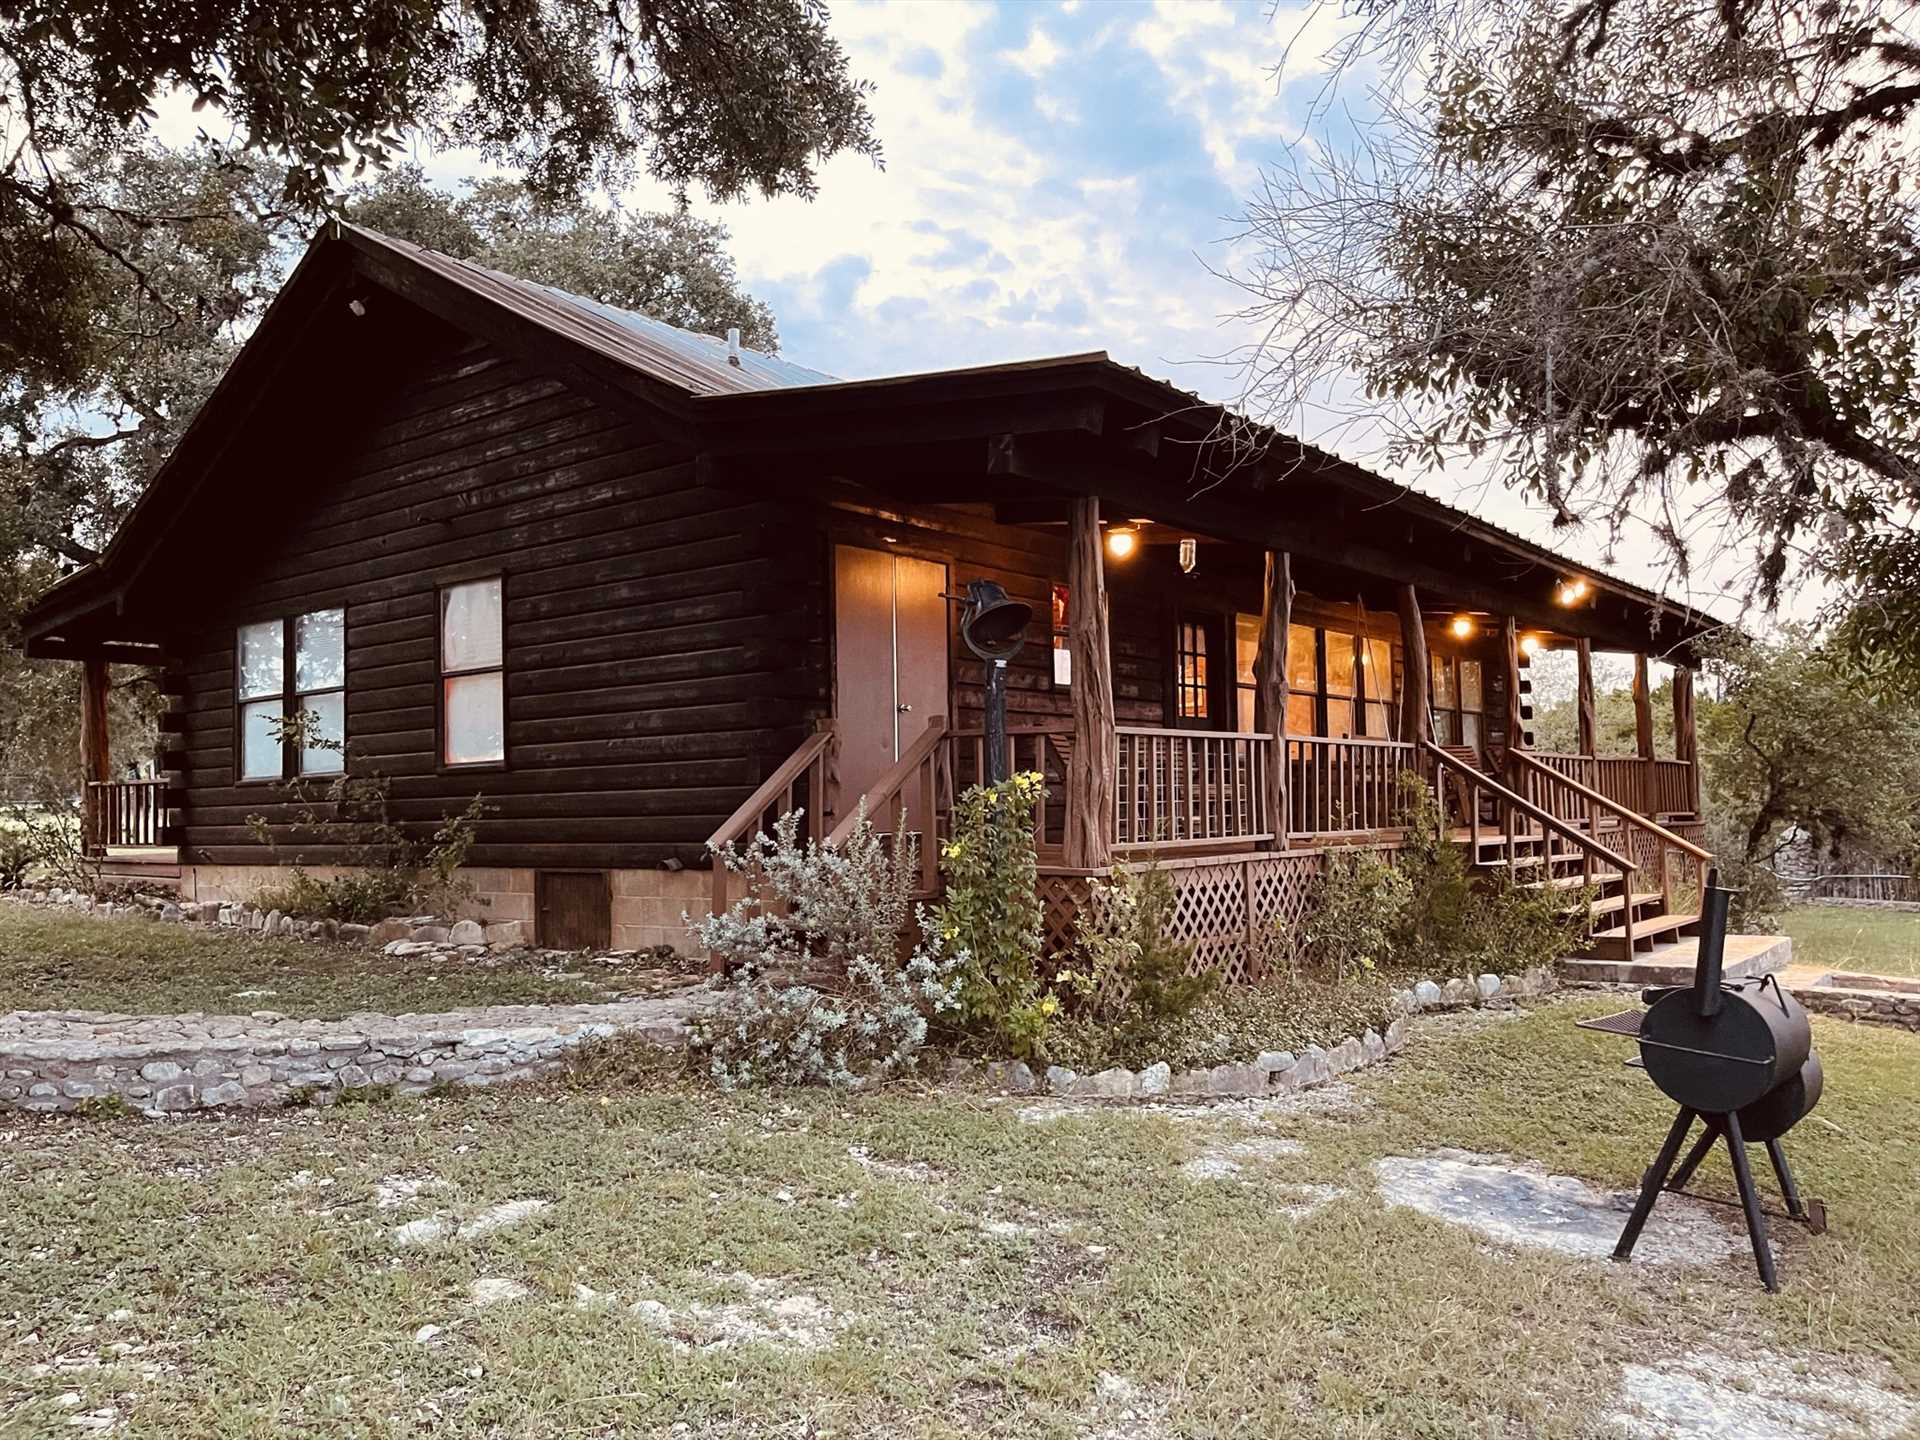                                                 Welcome to the Lightning Bug Springs Lodge, one of six buildings at the Retreat!! This sweet Hill Country haven serves as a quiet country escape for up to six guests.